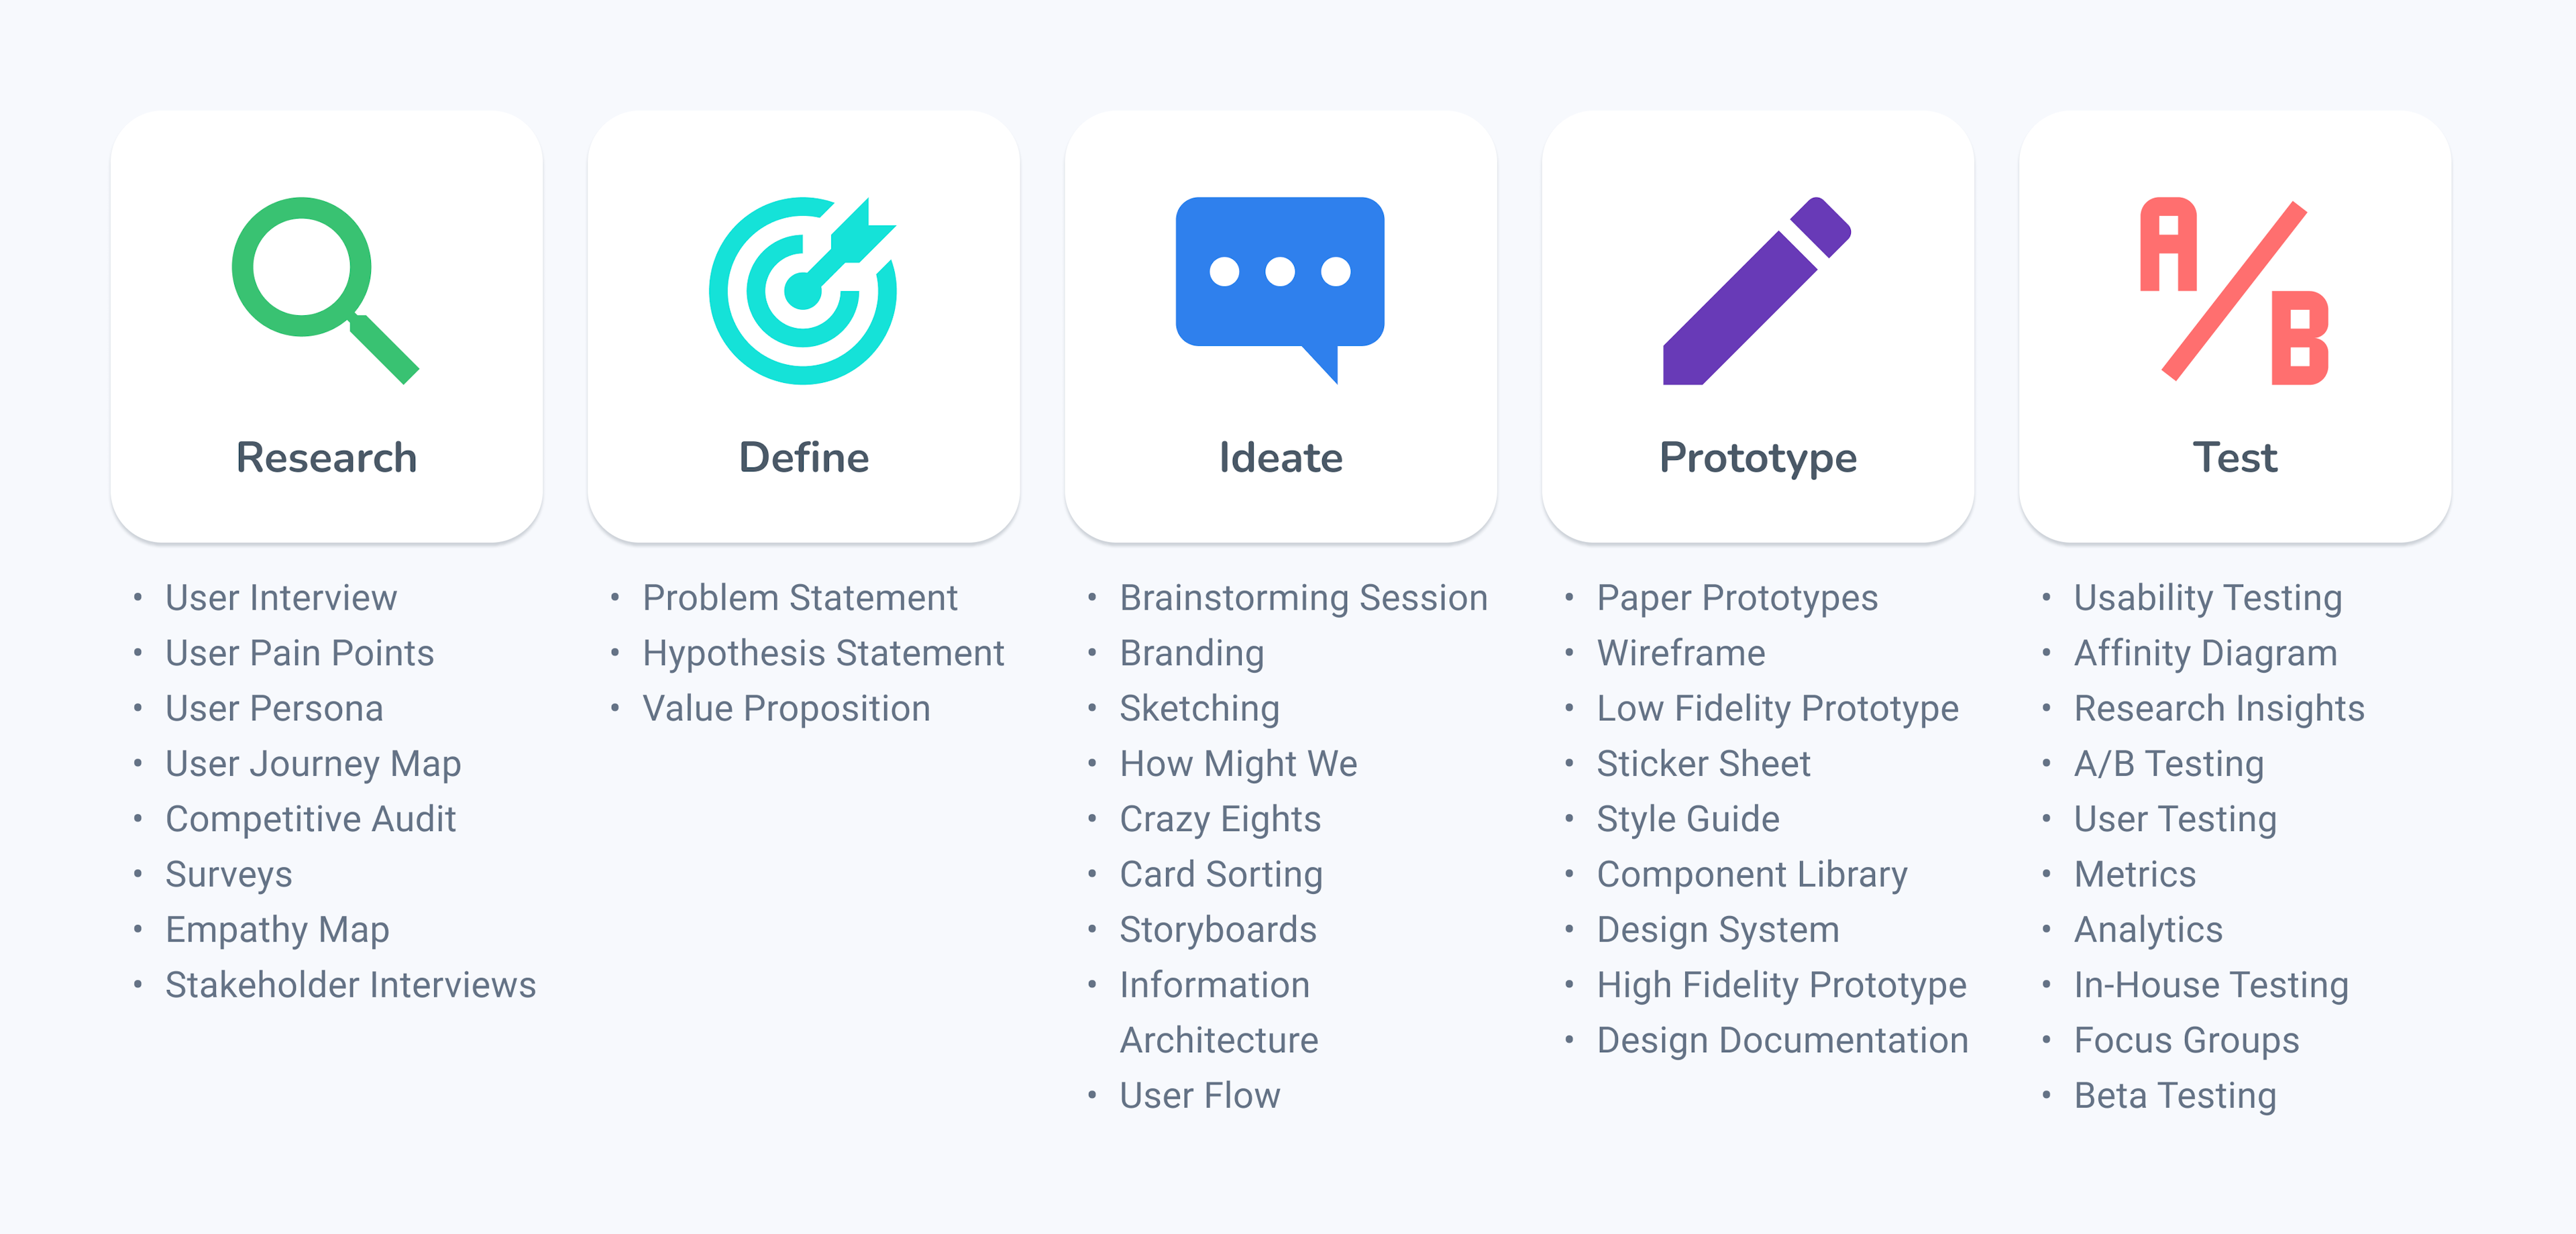 This shows a diagram of my design process which I follow in most of my projects. It also shows the common tools and methods associated with each design process step.